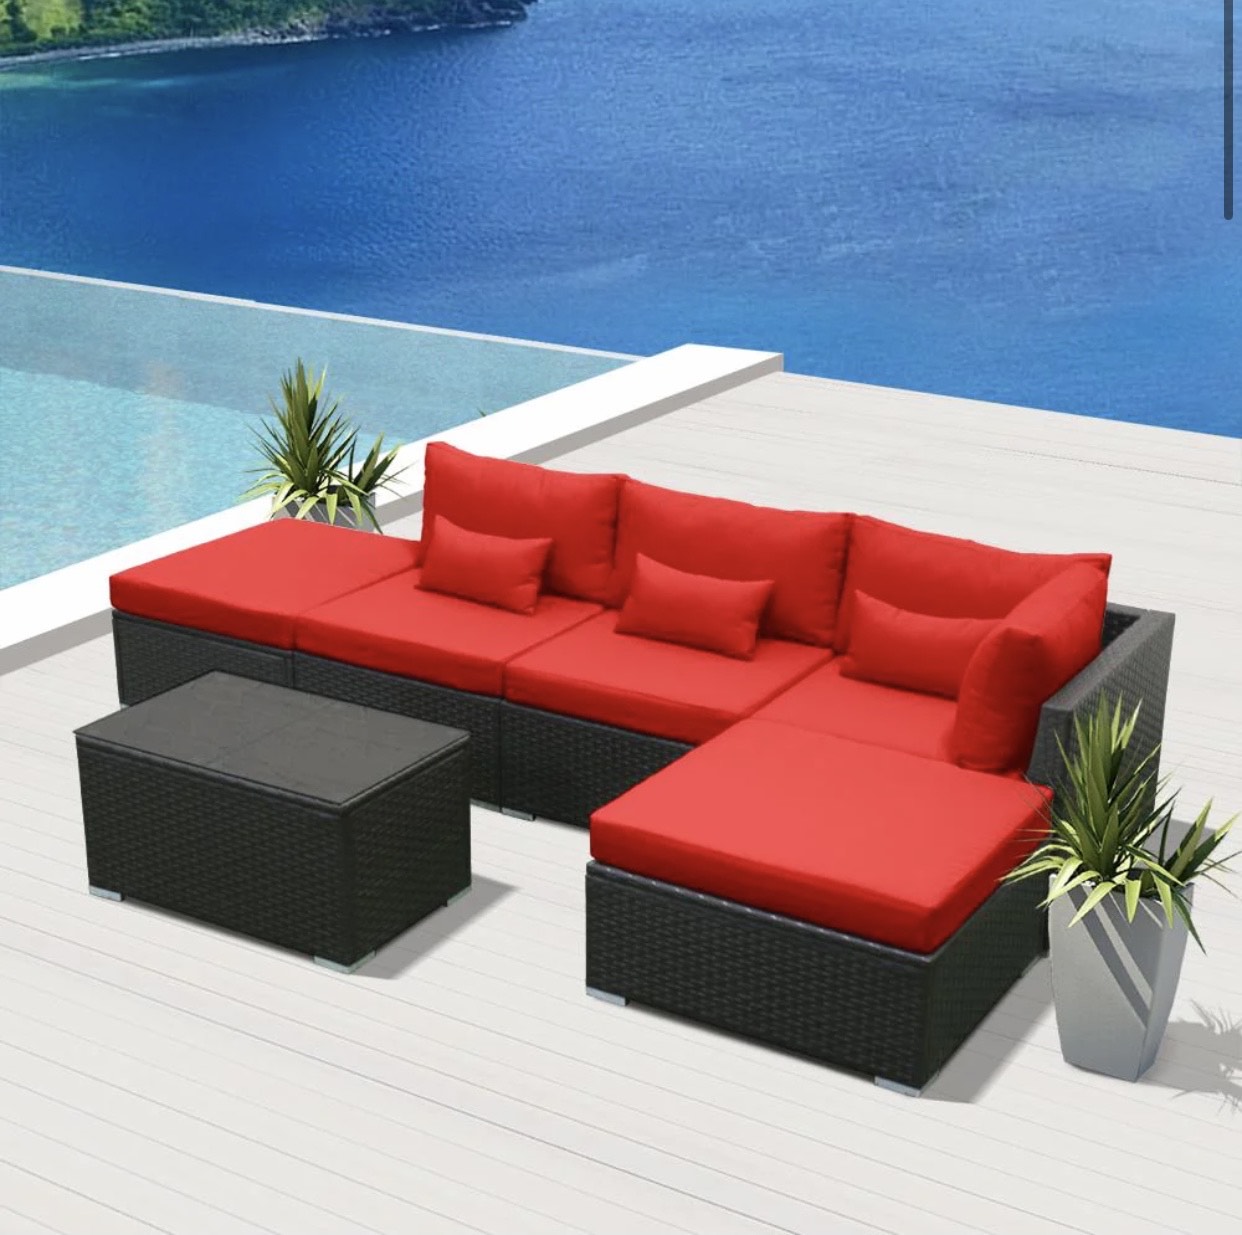 Crimson Red 6 Replacement Cushion Covers Set (Without Foam Insis)